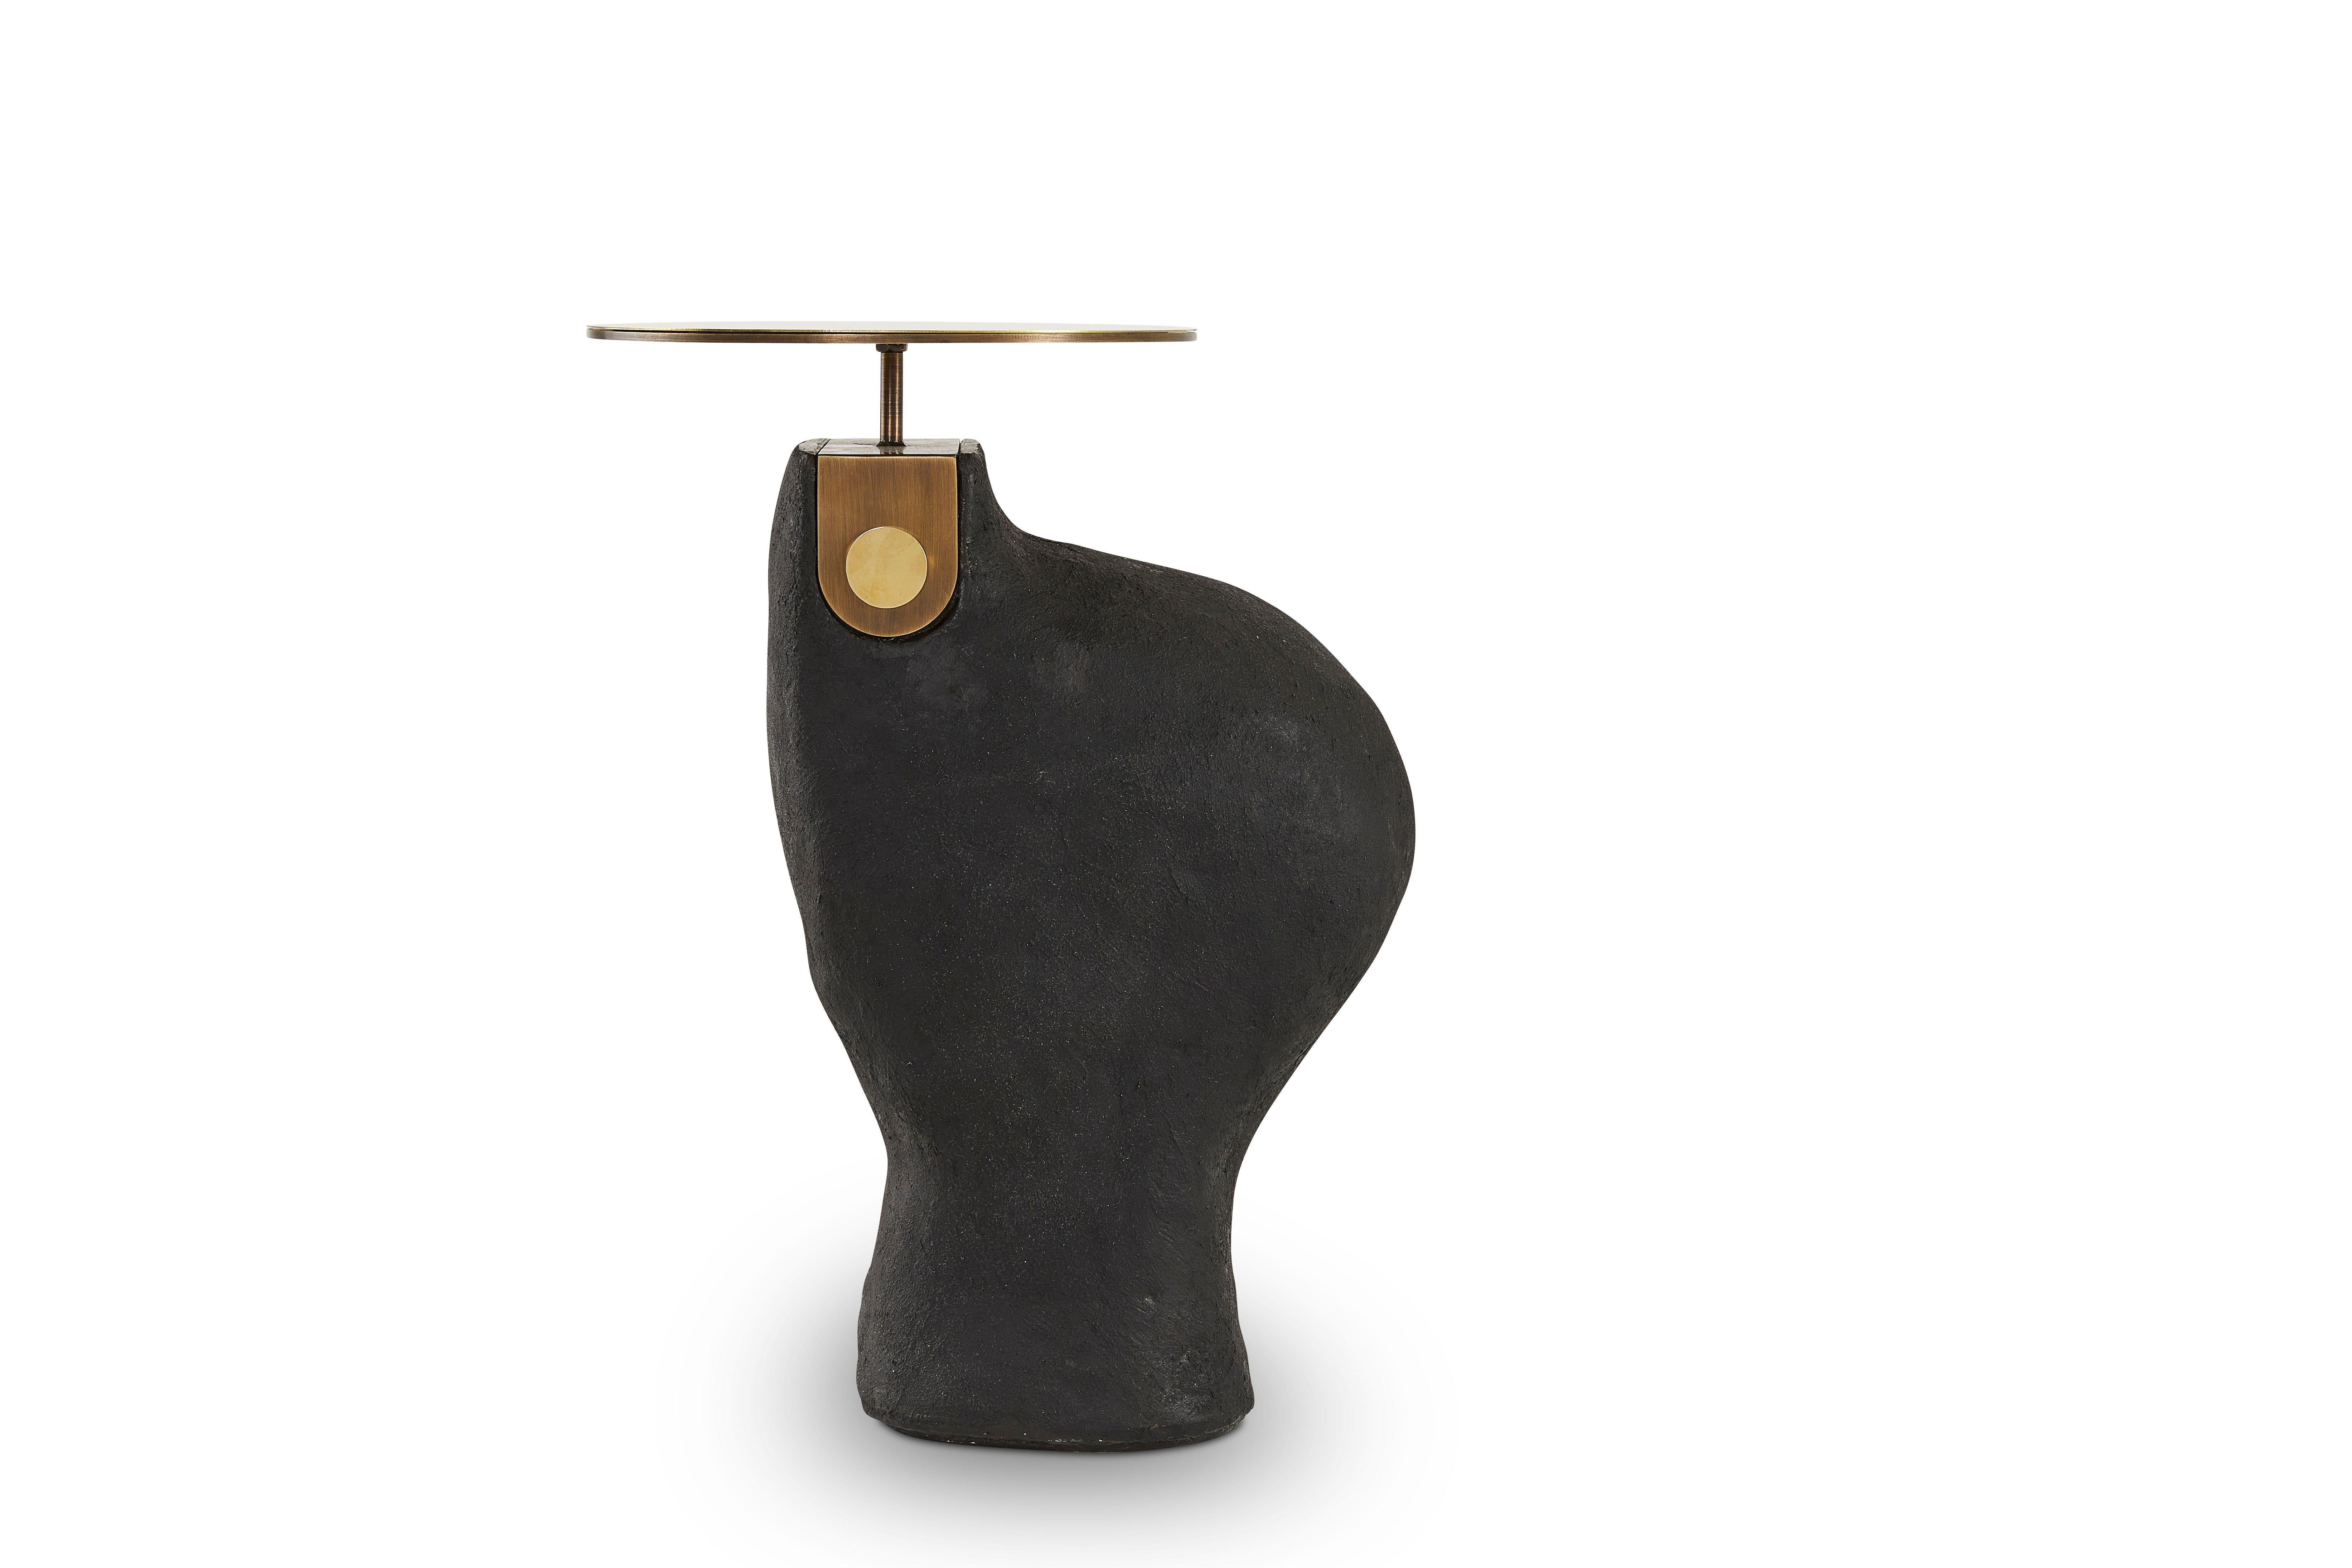 Yoruba 3 Side Table by Egg Designs
Dimensions: 52 L X 33 D X 43.5 H cm 
Materials: Composite Casting, Solid Brass, Bronze Coated Steel

Founded by South Africans and life partners, Greg and Roche Dry - Egg is a unique perspective in contemporary